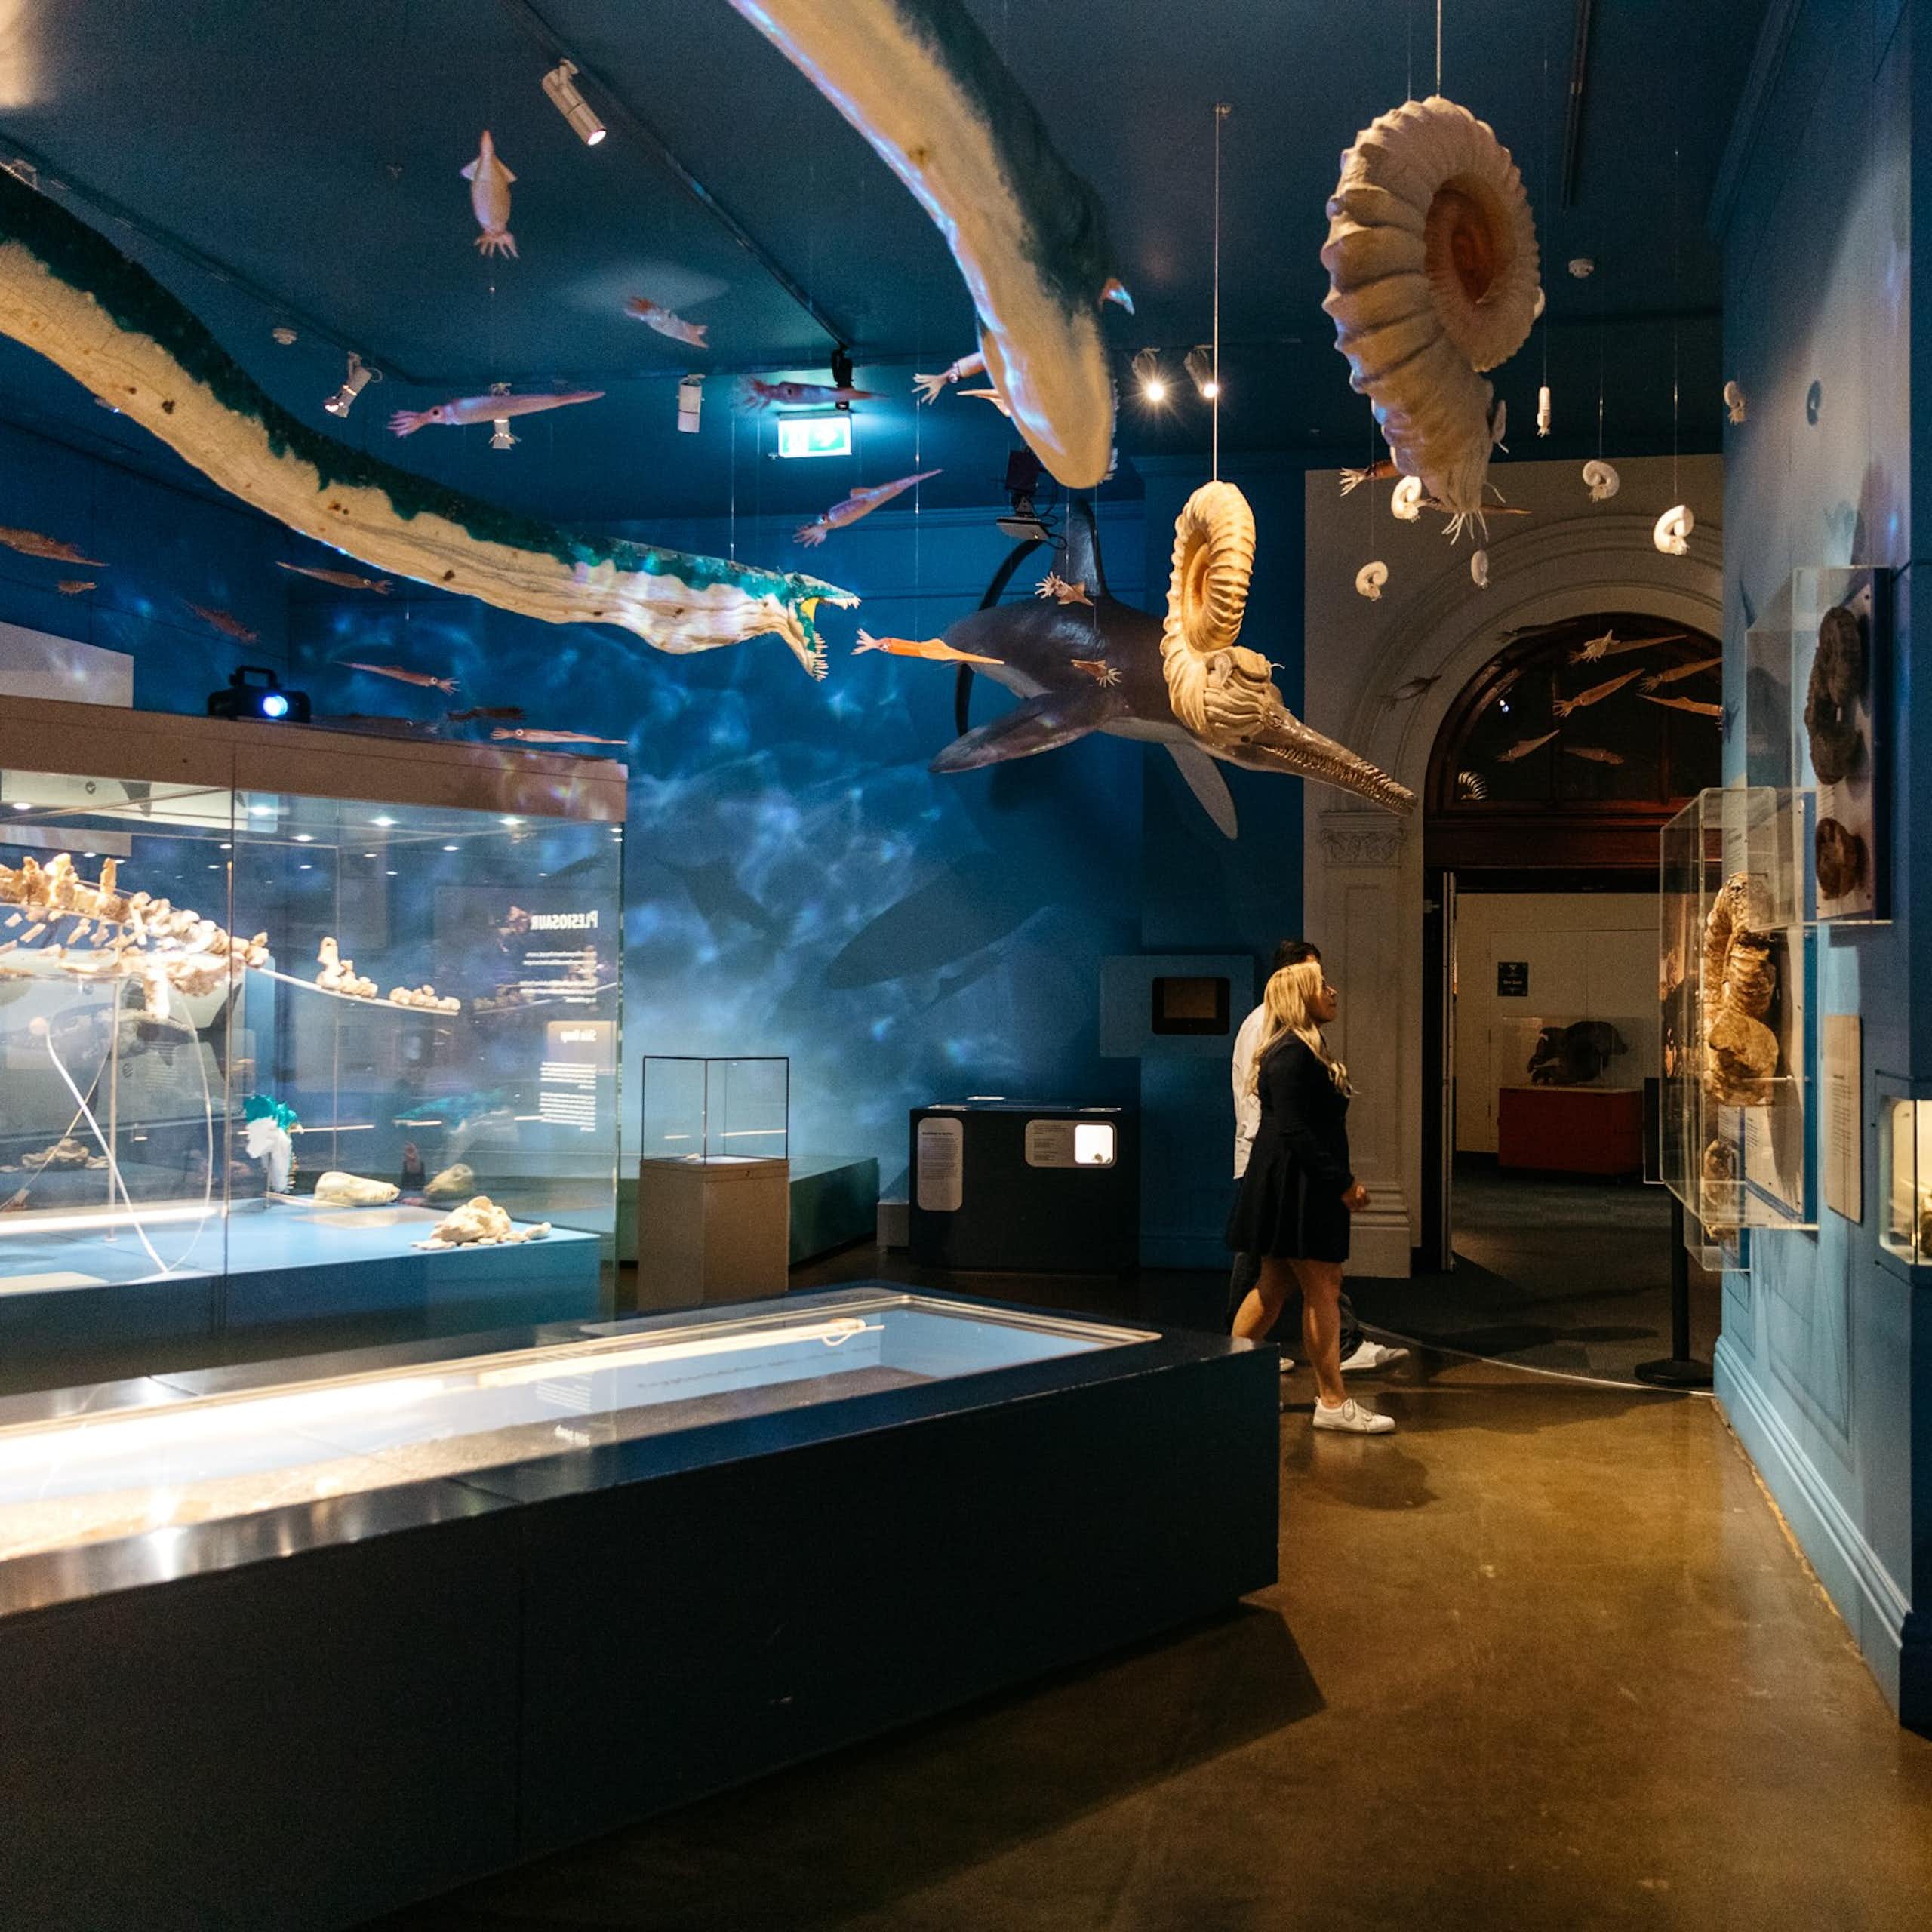 People walking though a museum exhibits with fossils in glass cases and models of animals handing from the ceiling.